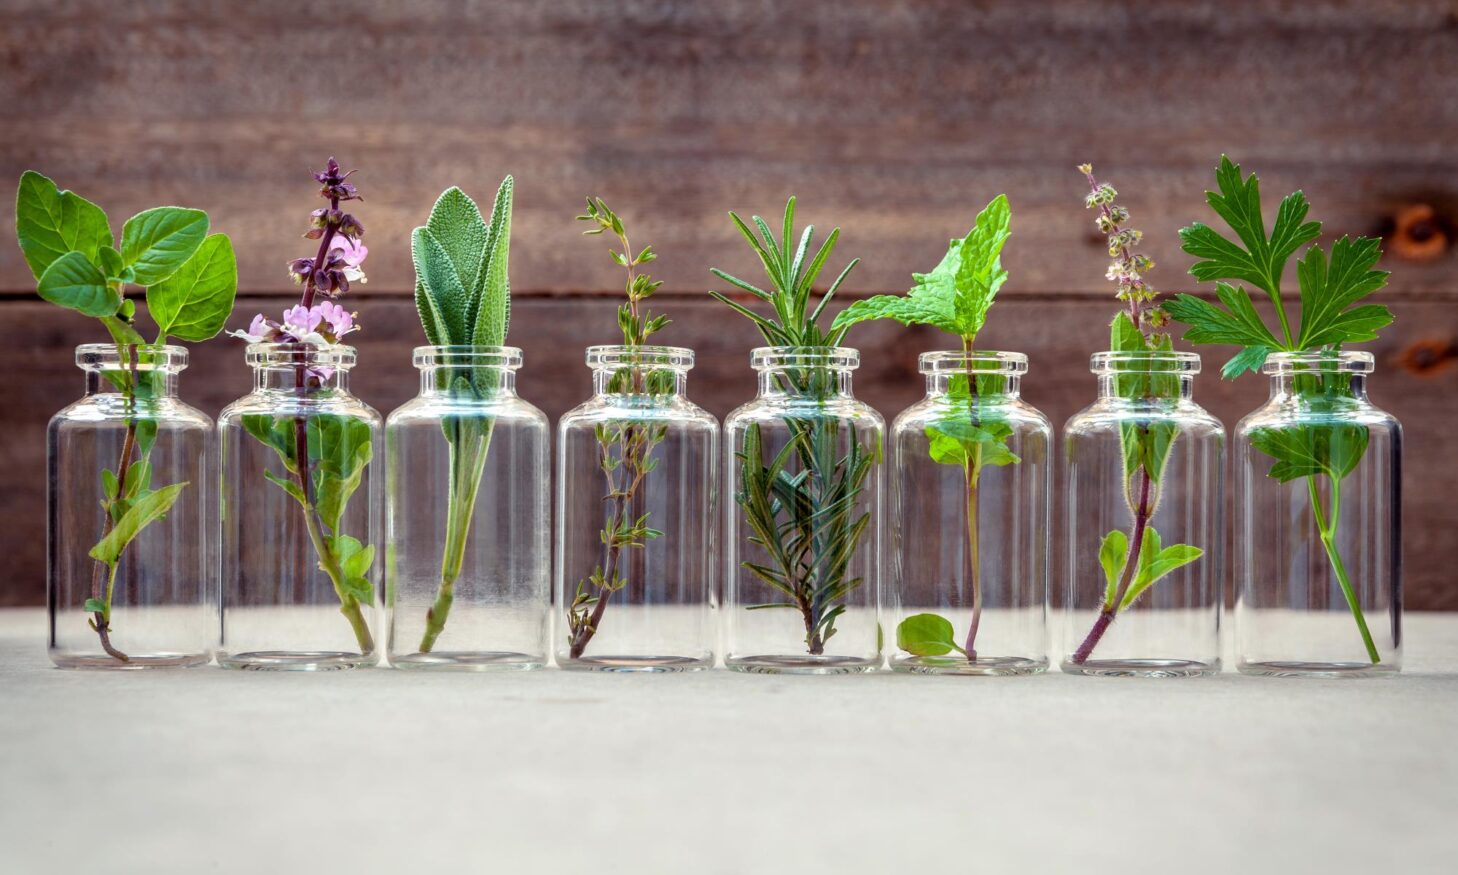 glass bottles with flowers inside - representing essential oils